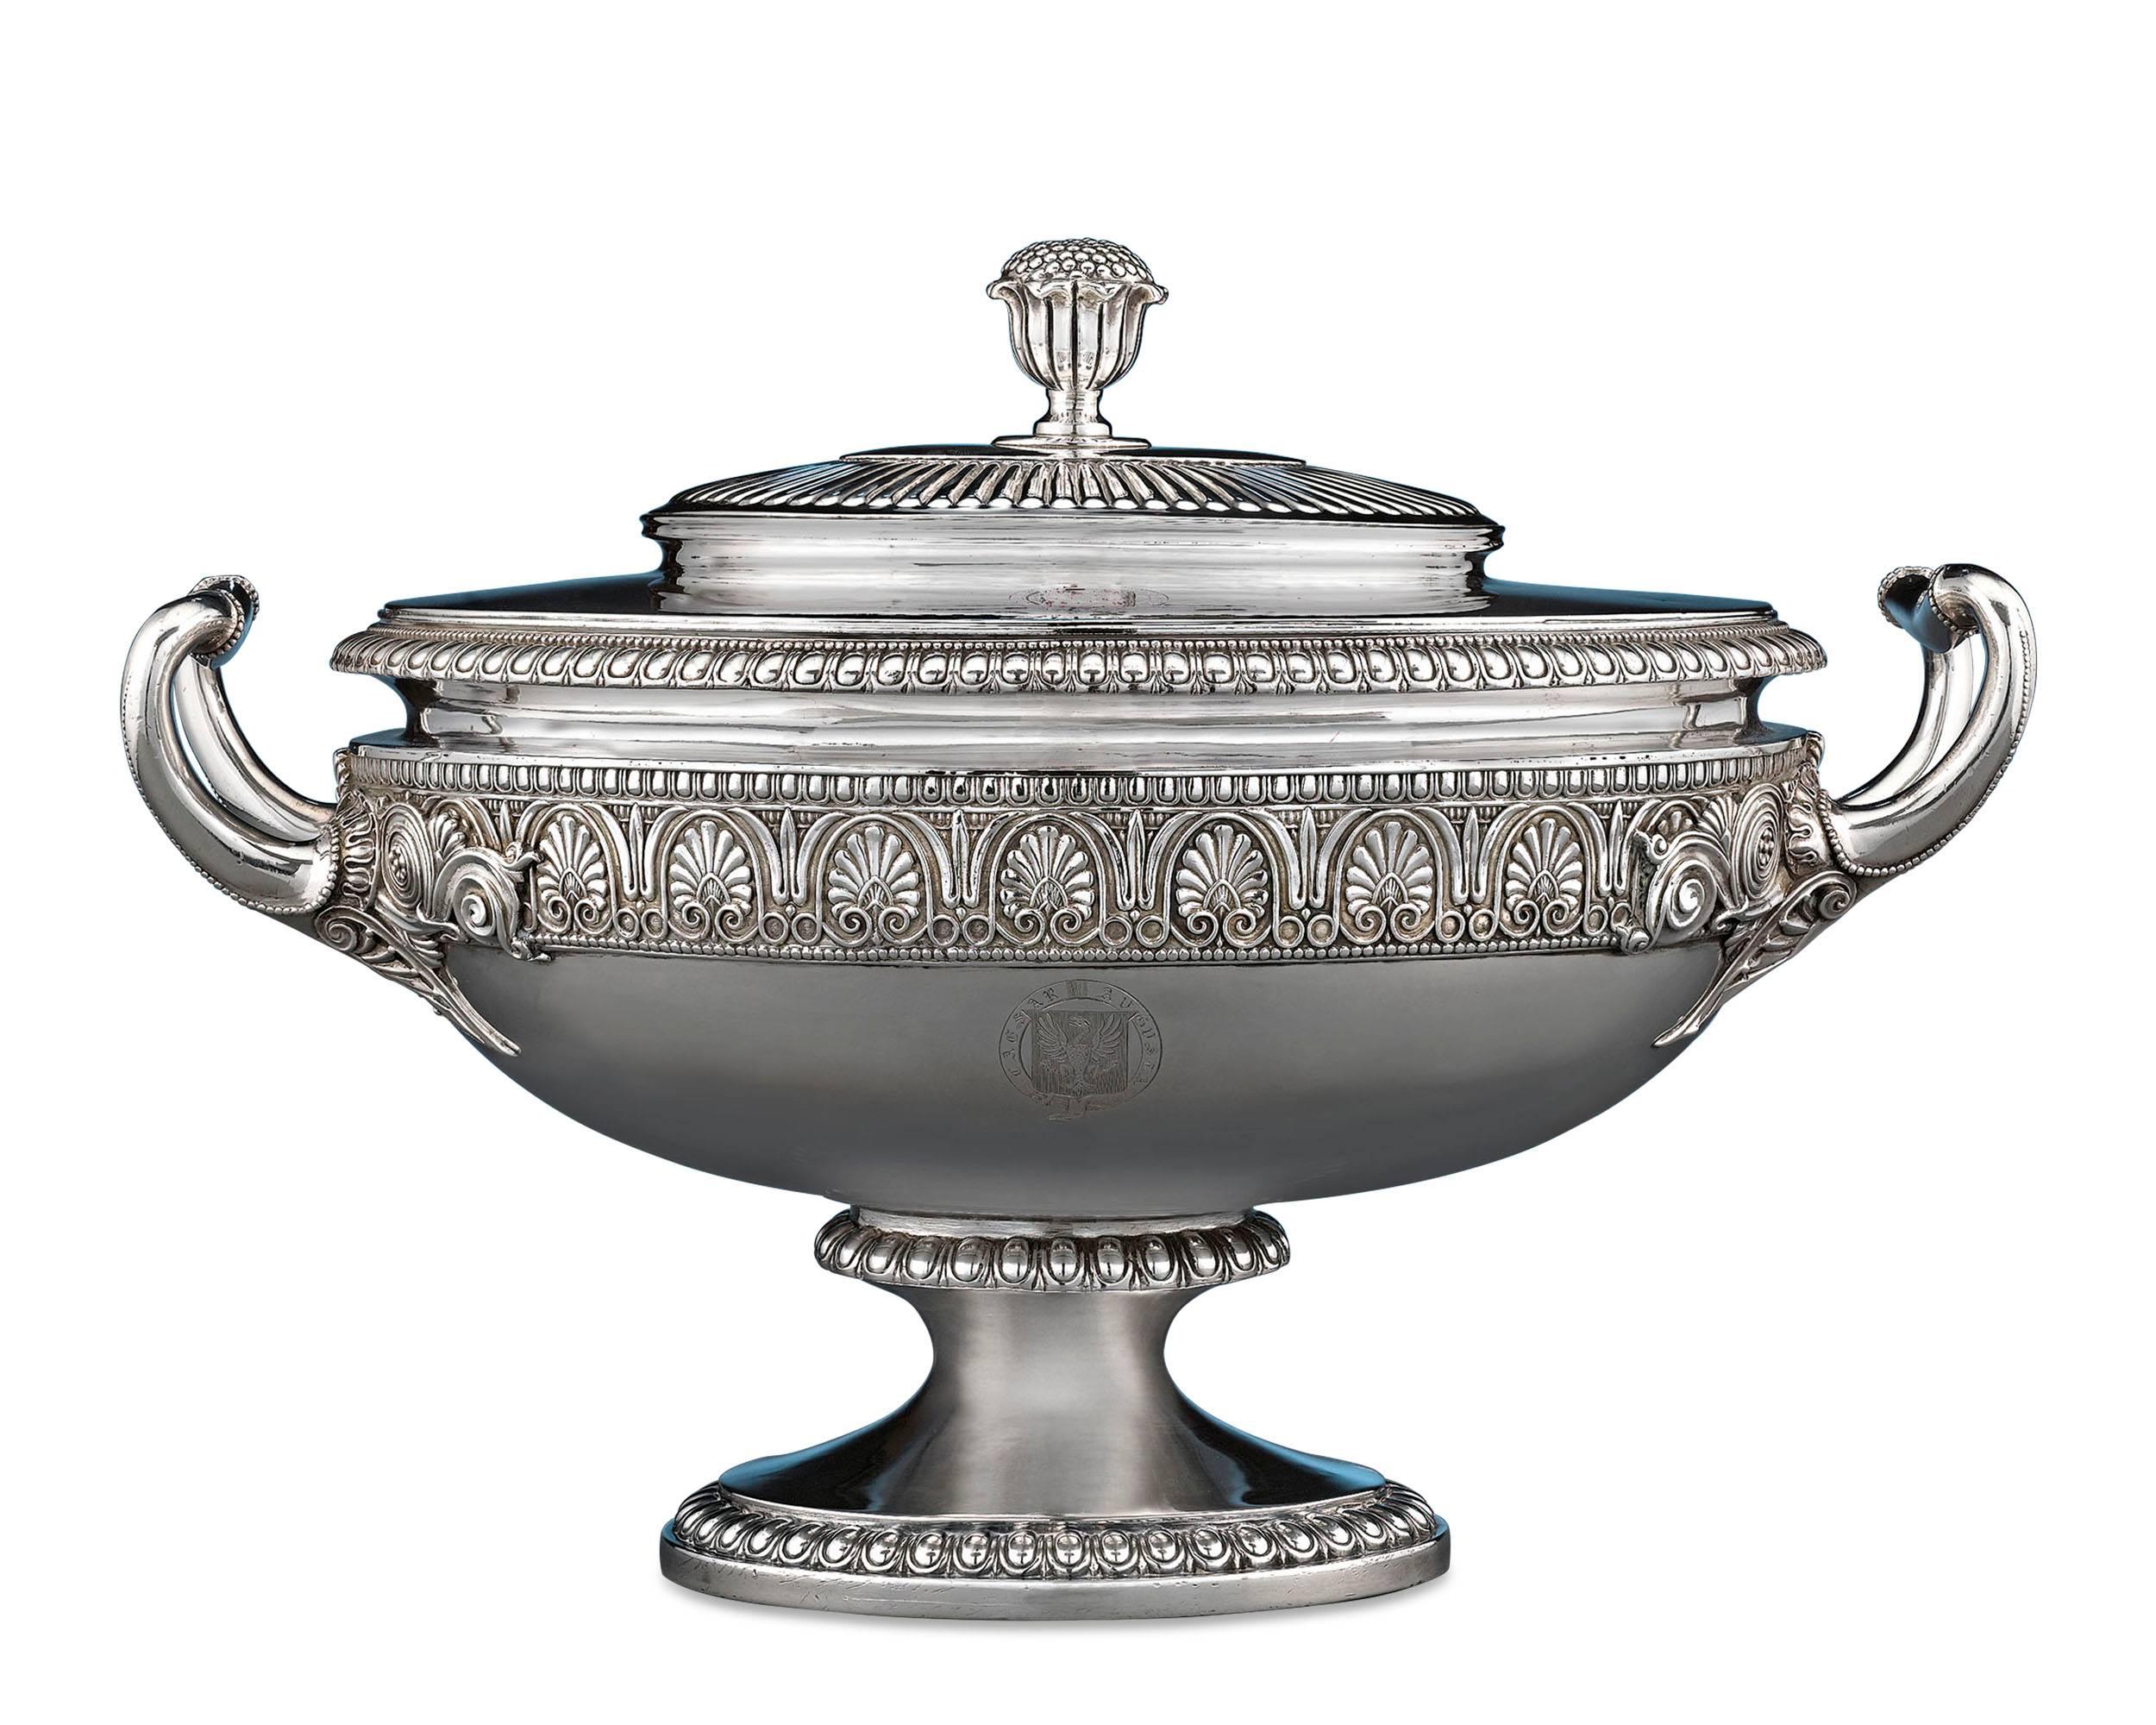 Superbly designed and masterfully crafted, this George IV silver tureen is a remarkable example of Georgian design by one of England's most celebrated silversmiths, Paul Storr. Storr is best known for his incomparable craftsmanship and incredible